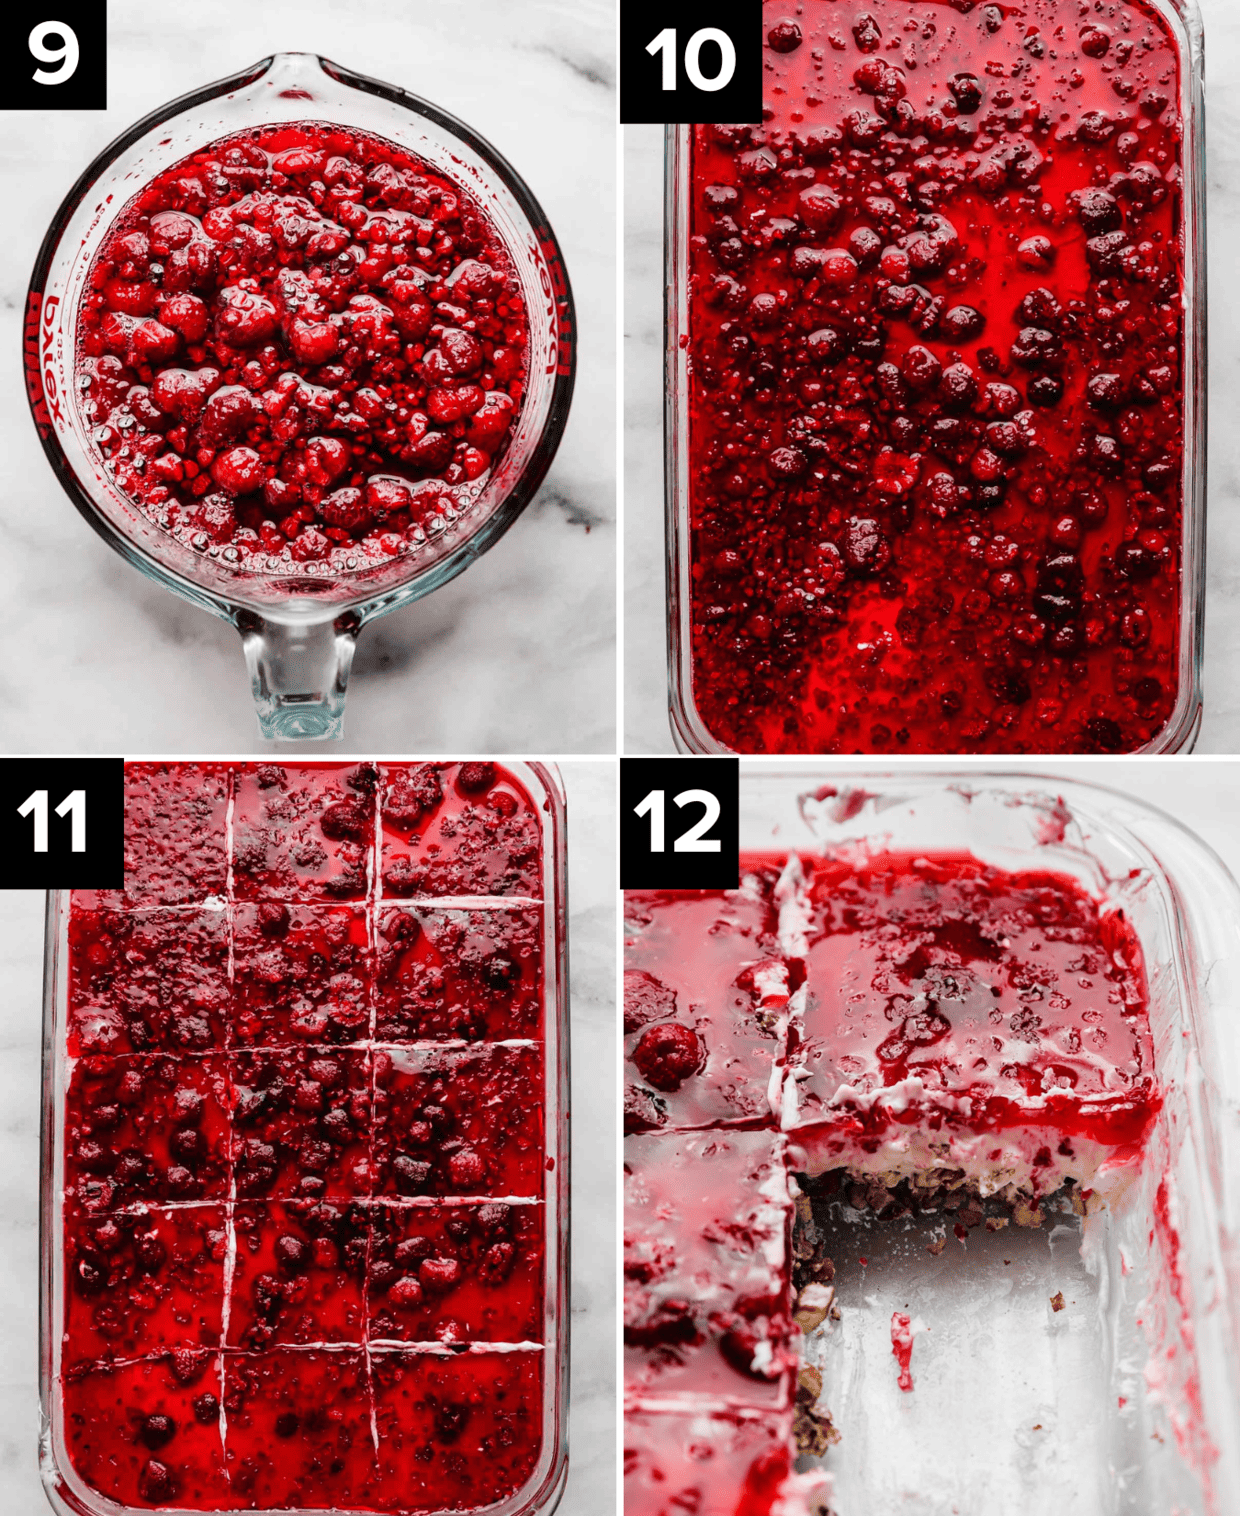 Four photos showing how to make the best Pretzel Jello Salad, top right is frozen raspberries in red jello mixture, top right is raspberry jello pretzel salad in a baking dish, bottom left is Pretzel Jello Salad cut into squares, and bottom right is sliced Pretzel Jello Salad.